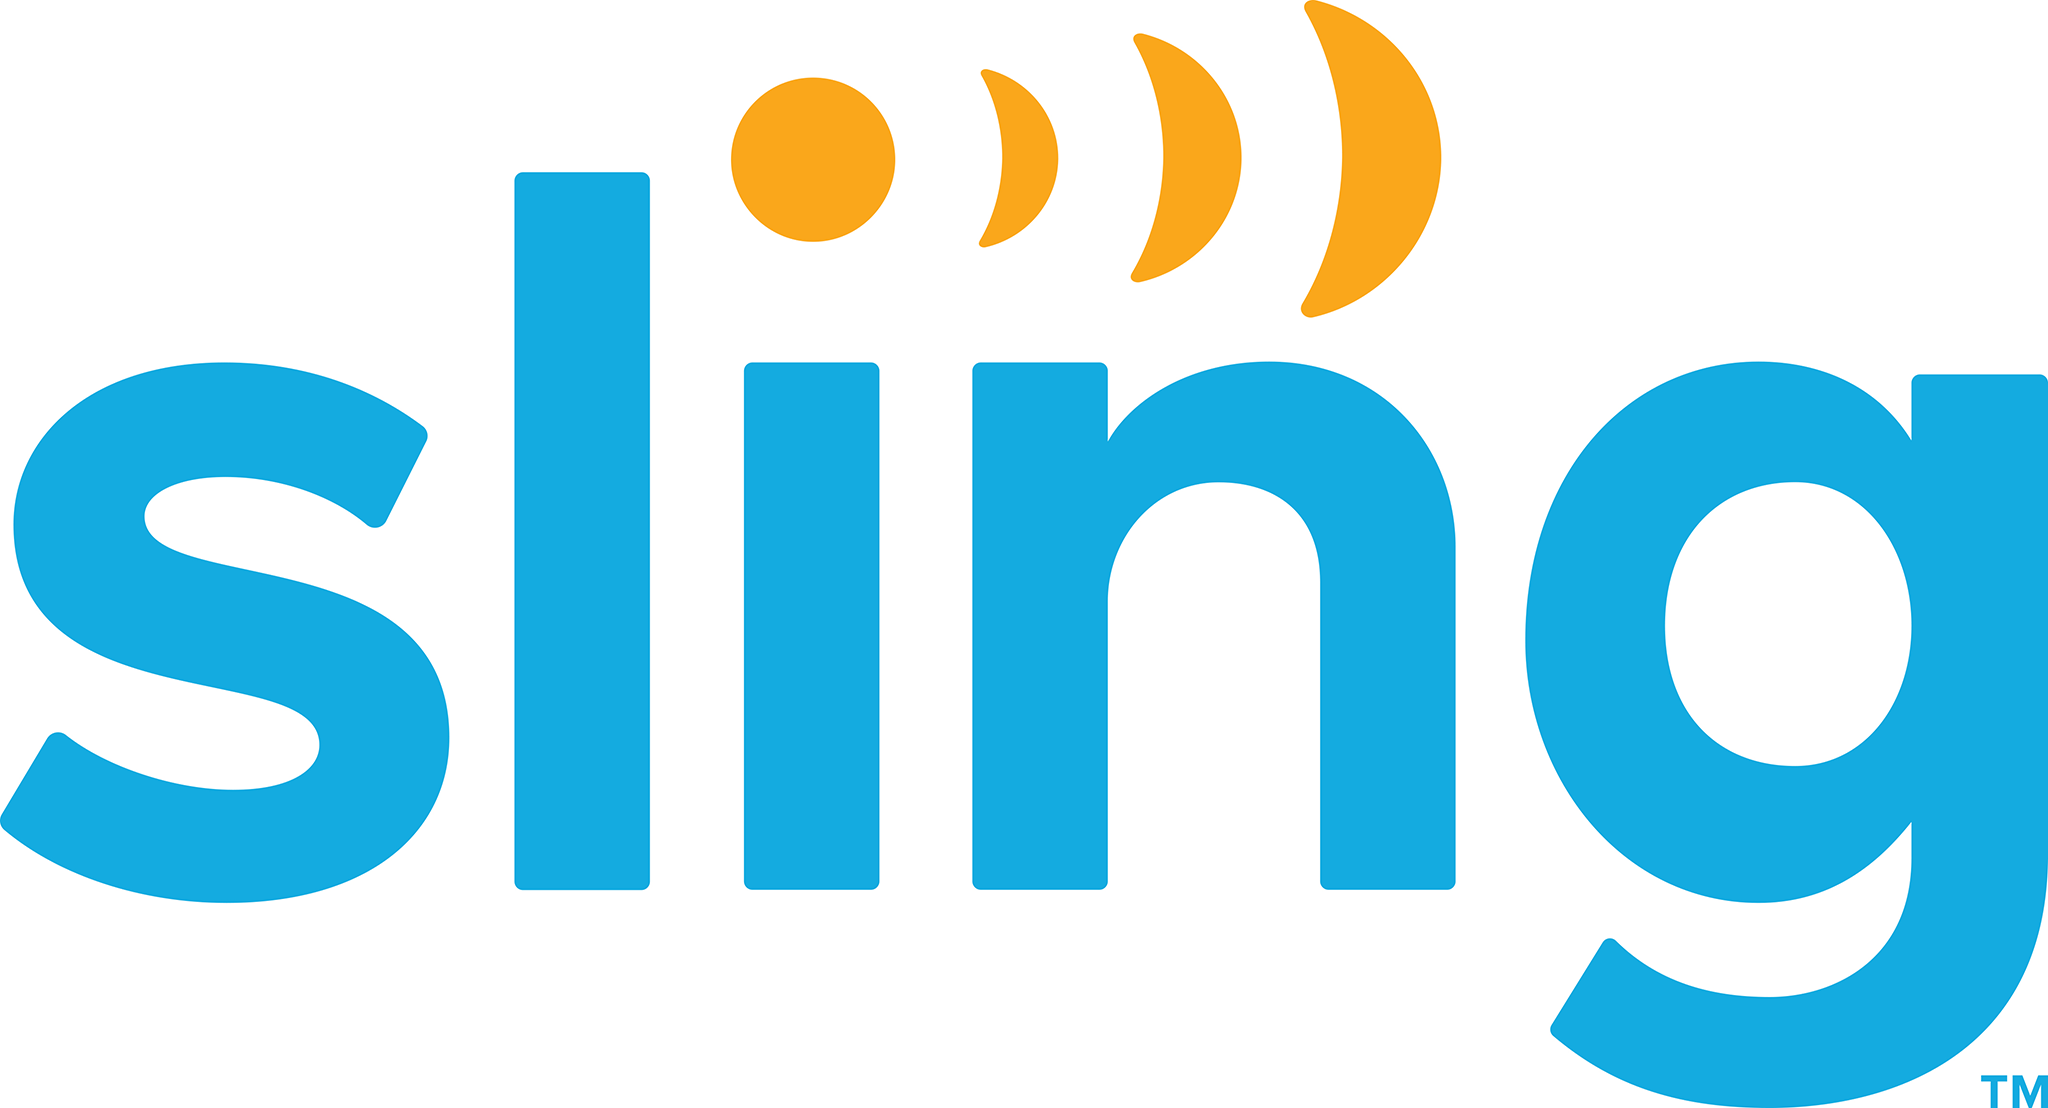 Sling TV Deals: What’s Available and Who Are They Best For?